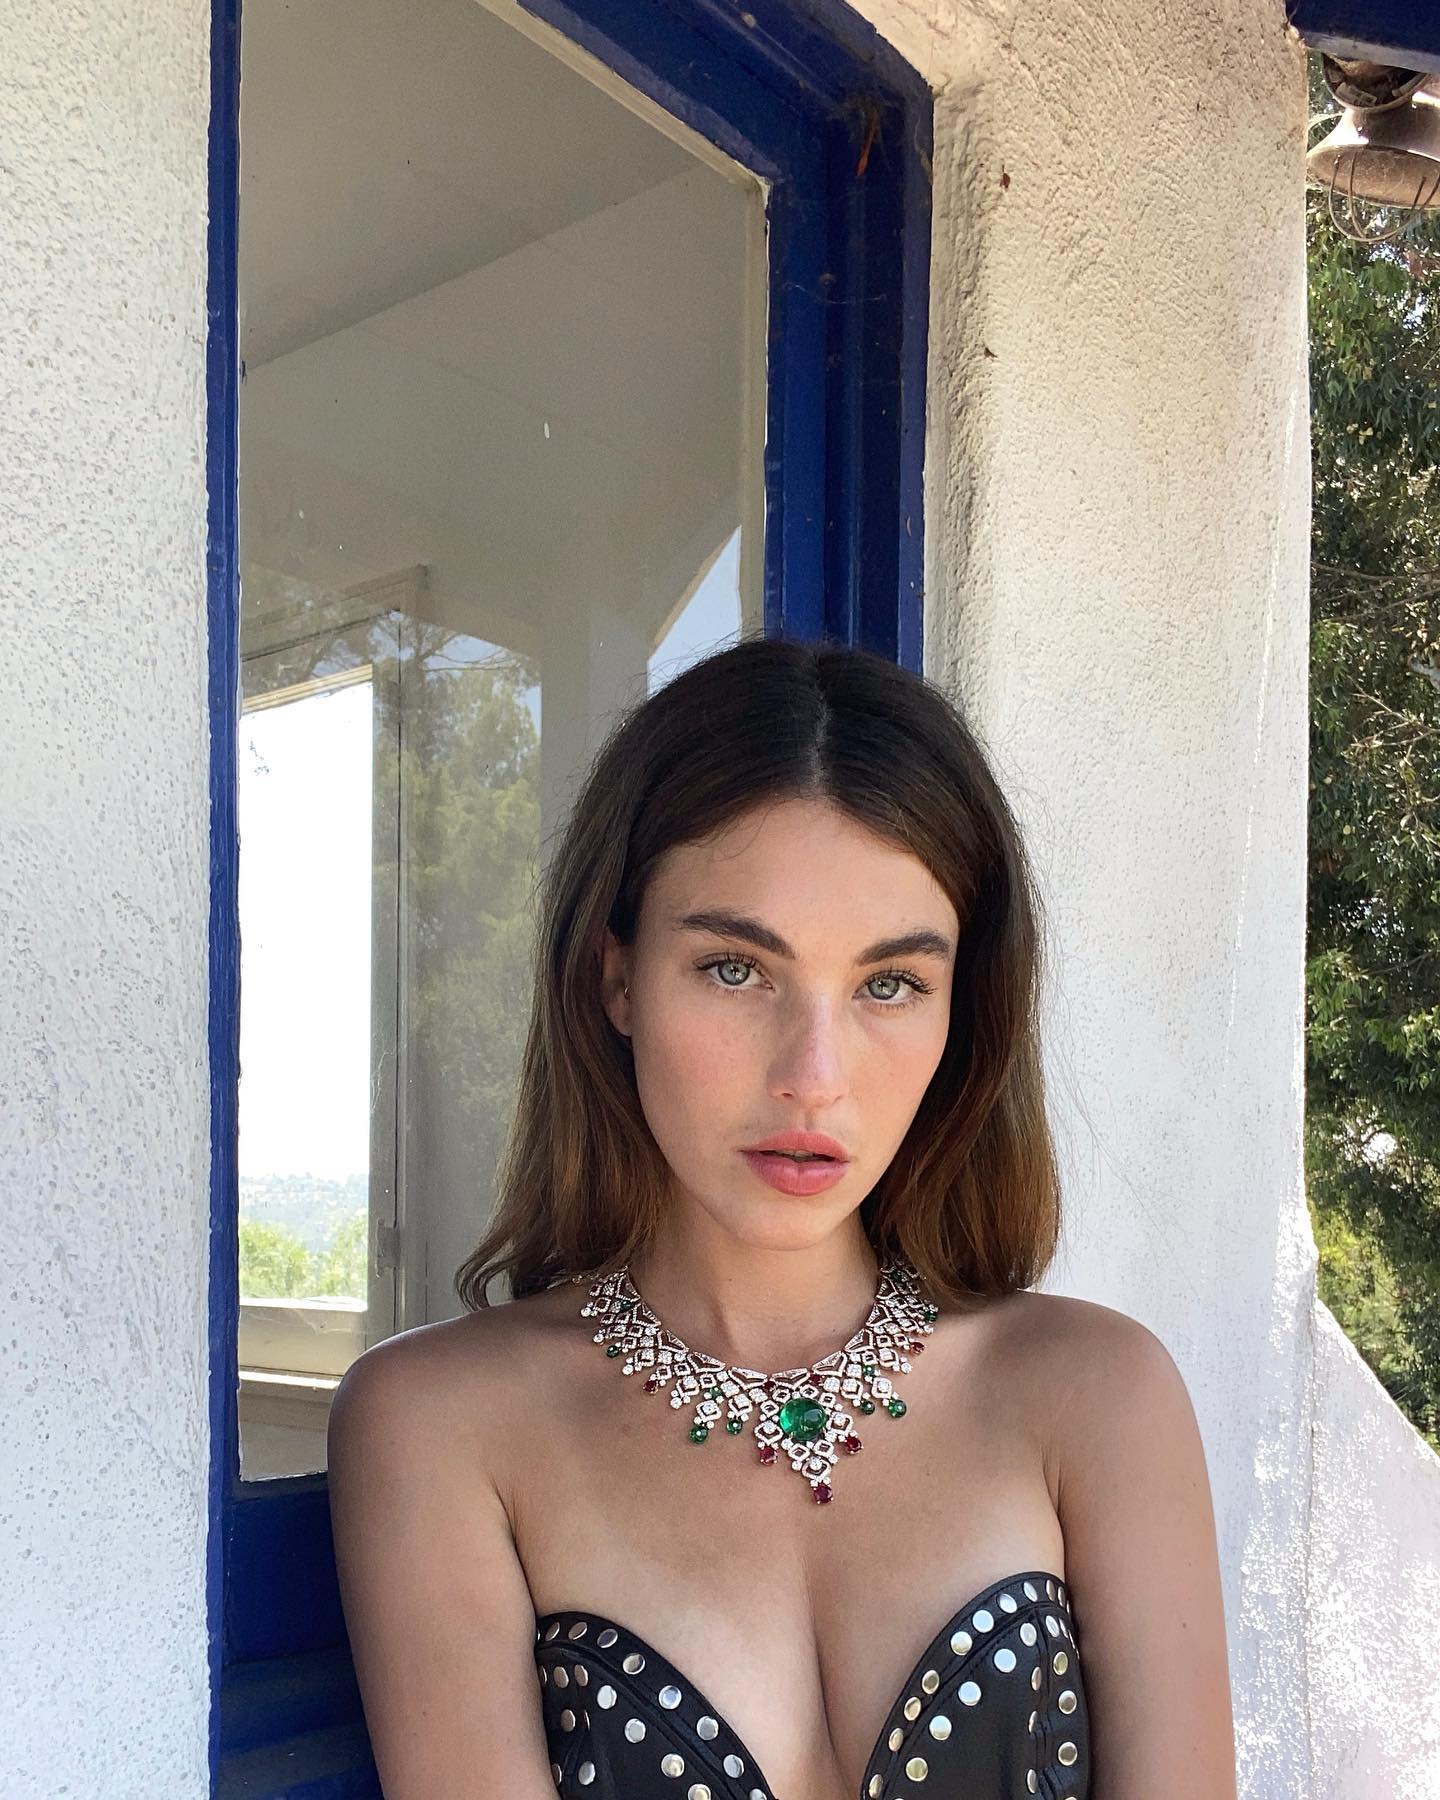 Rainey Qualley Showing Off the Jewels! - Photo 2